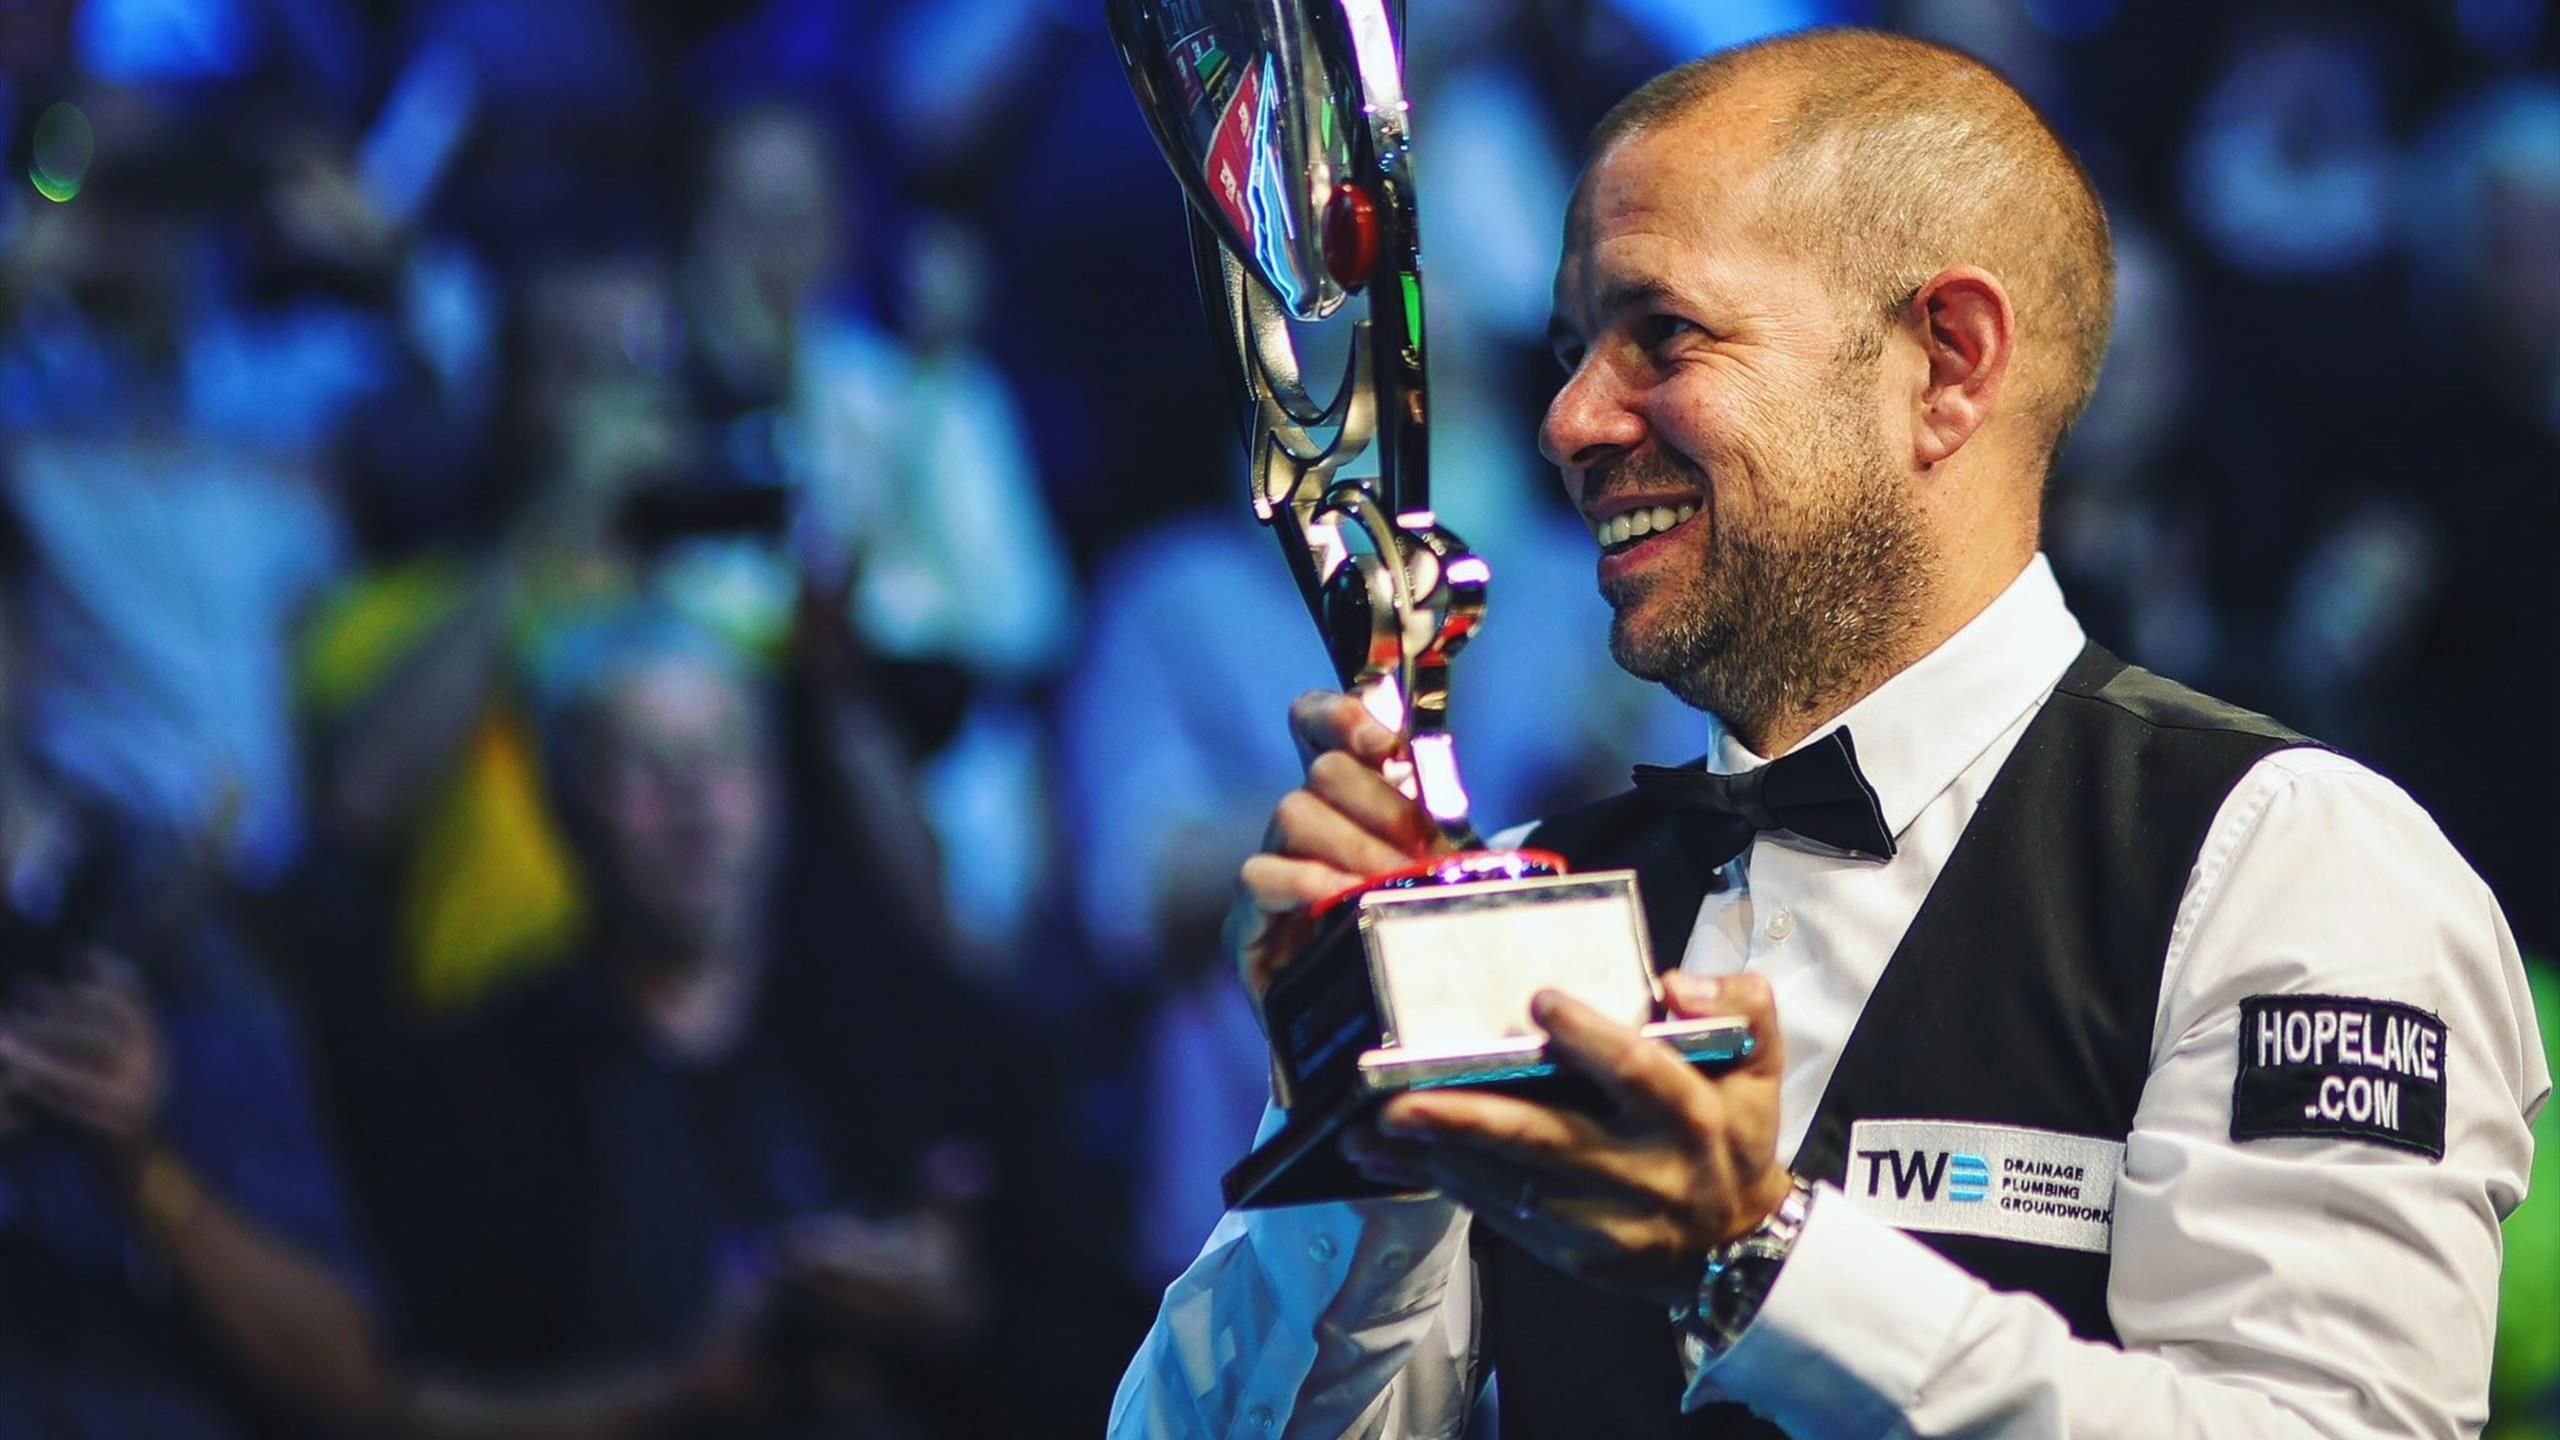 Barry Hawkins returns to world top 16 after European Masters snooker win, Ronnie OSullivan at No